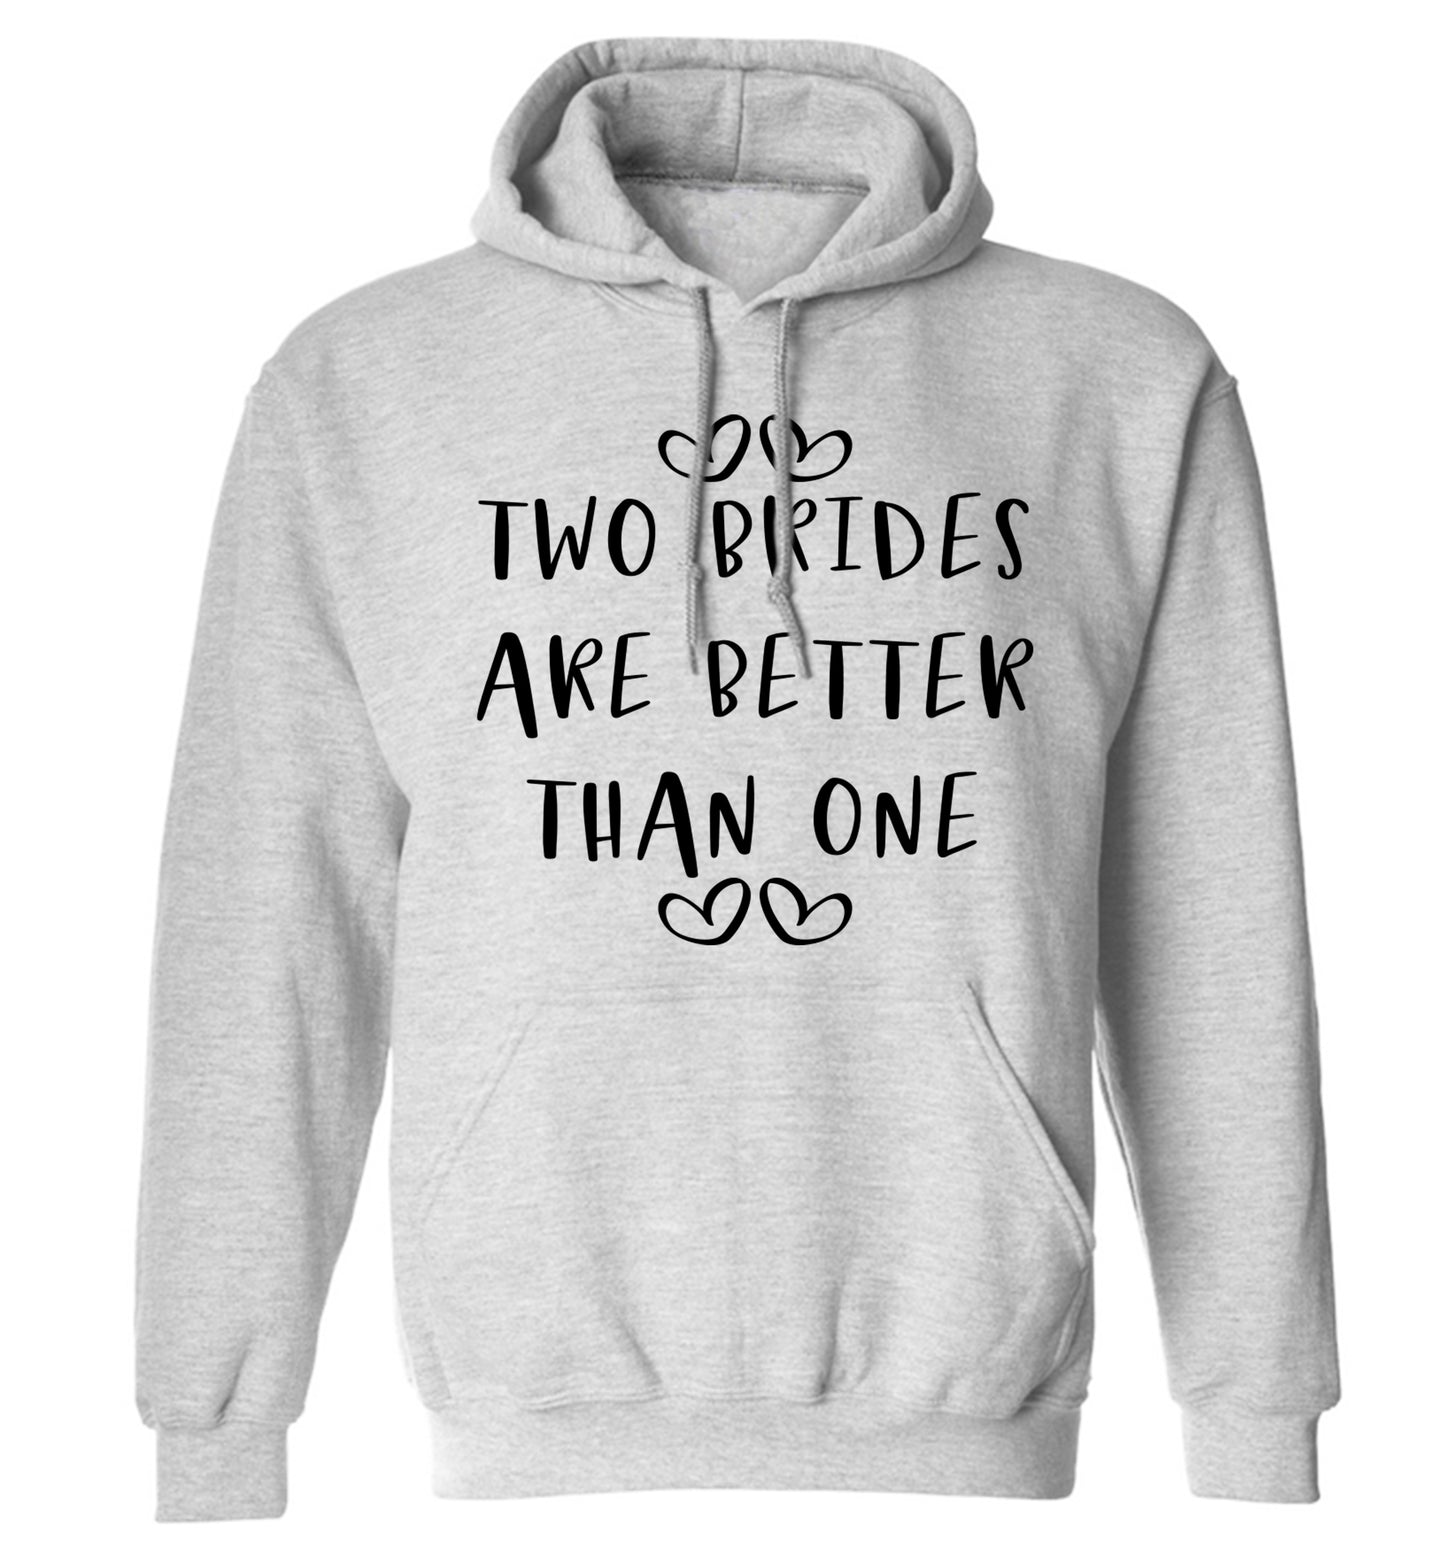 Two brides are better than one adults unisex grey hoodie 2XL